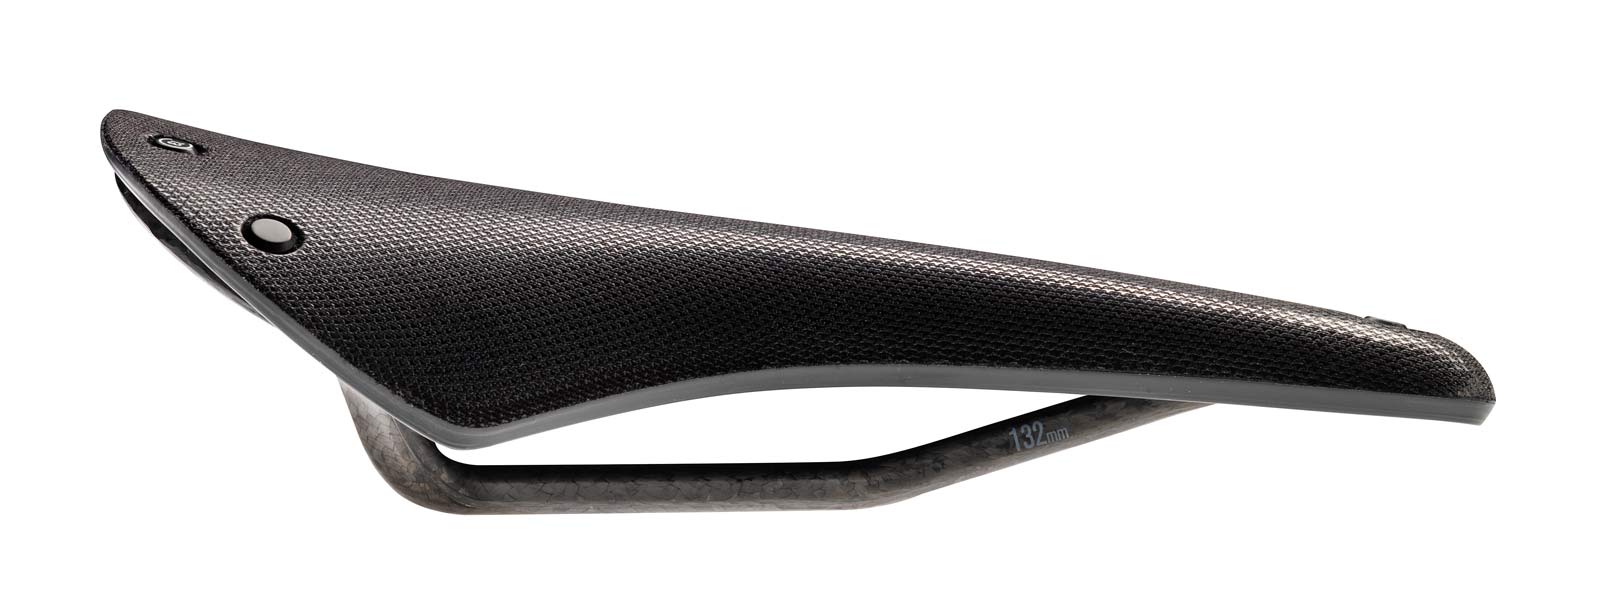 First Look: Brooks Cambium C13 tops All-Weather waterproof saddle 